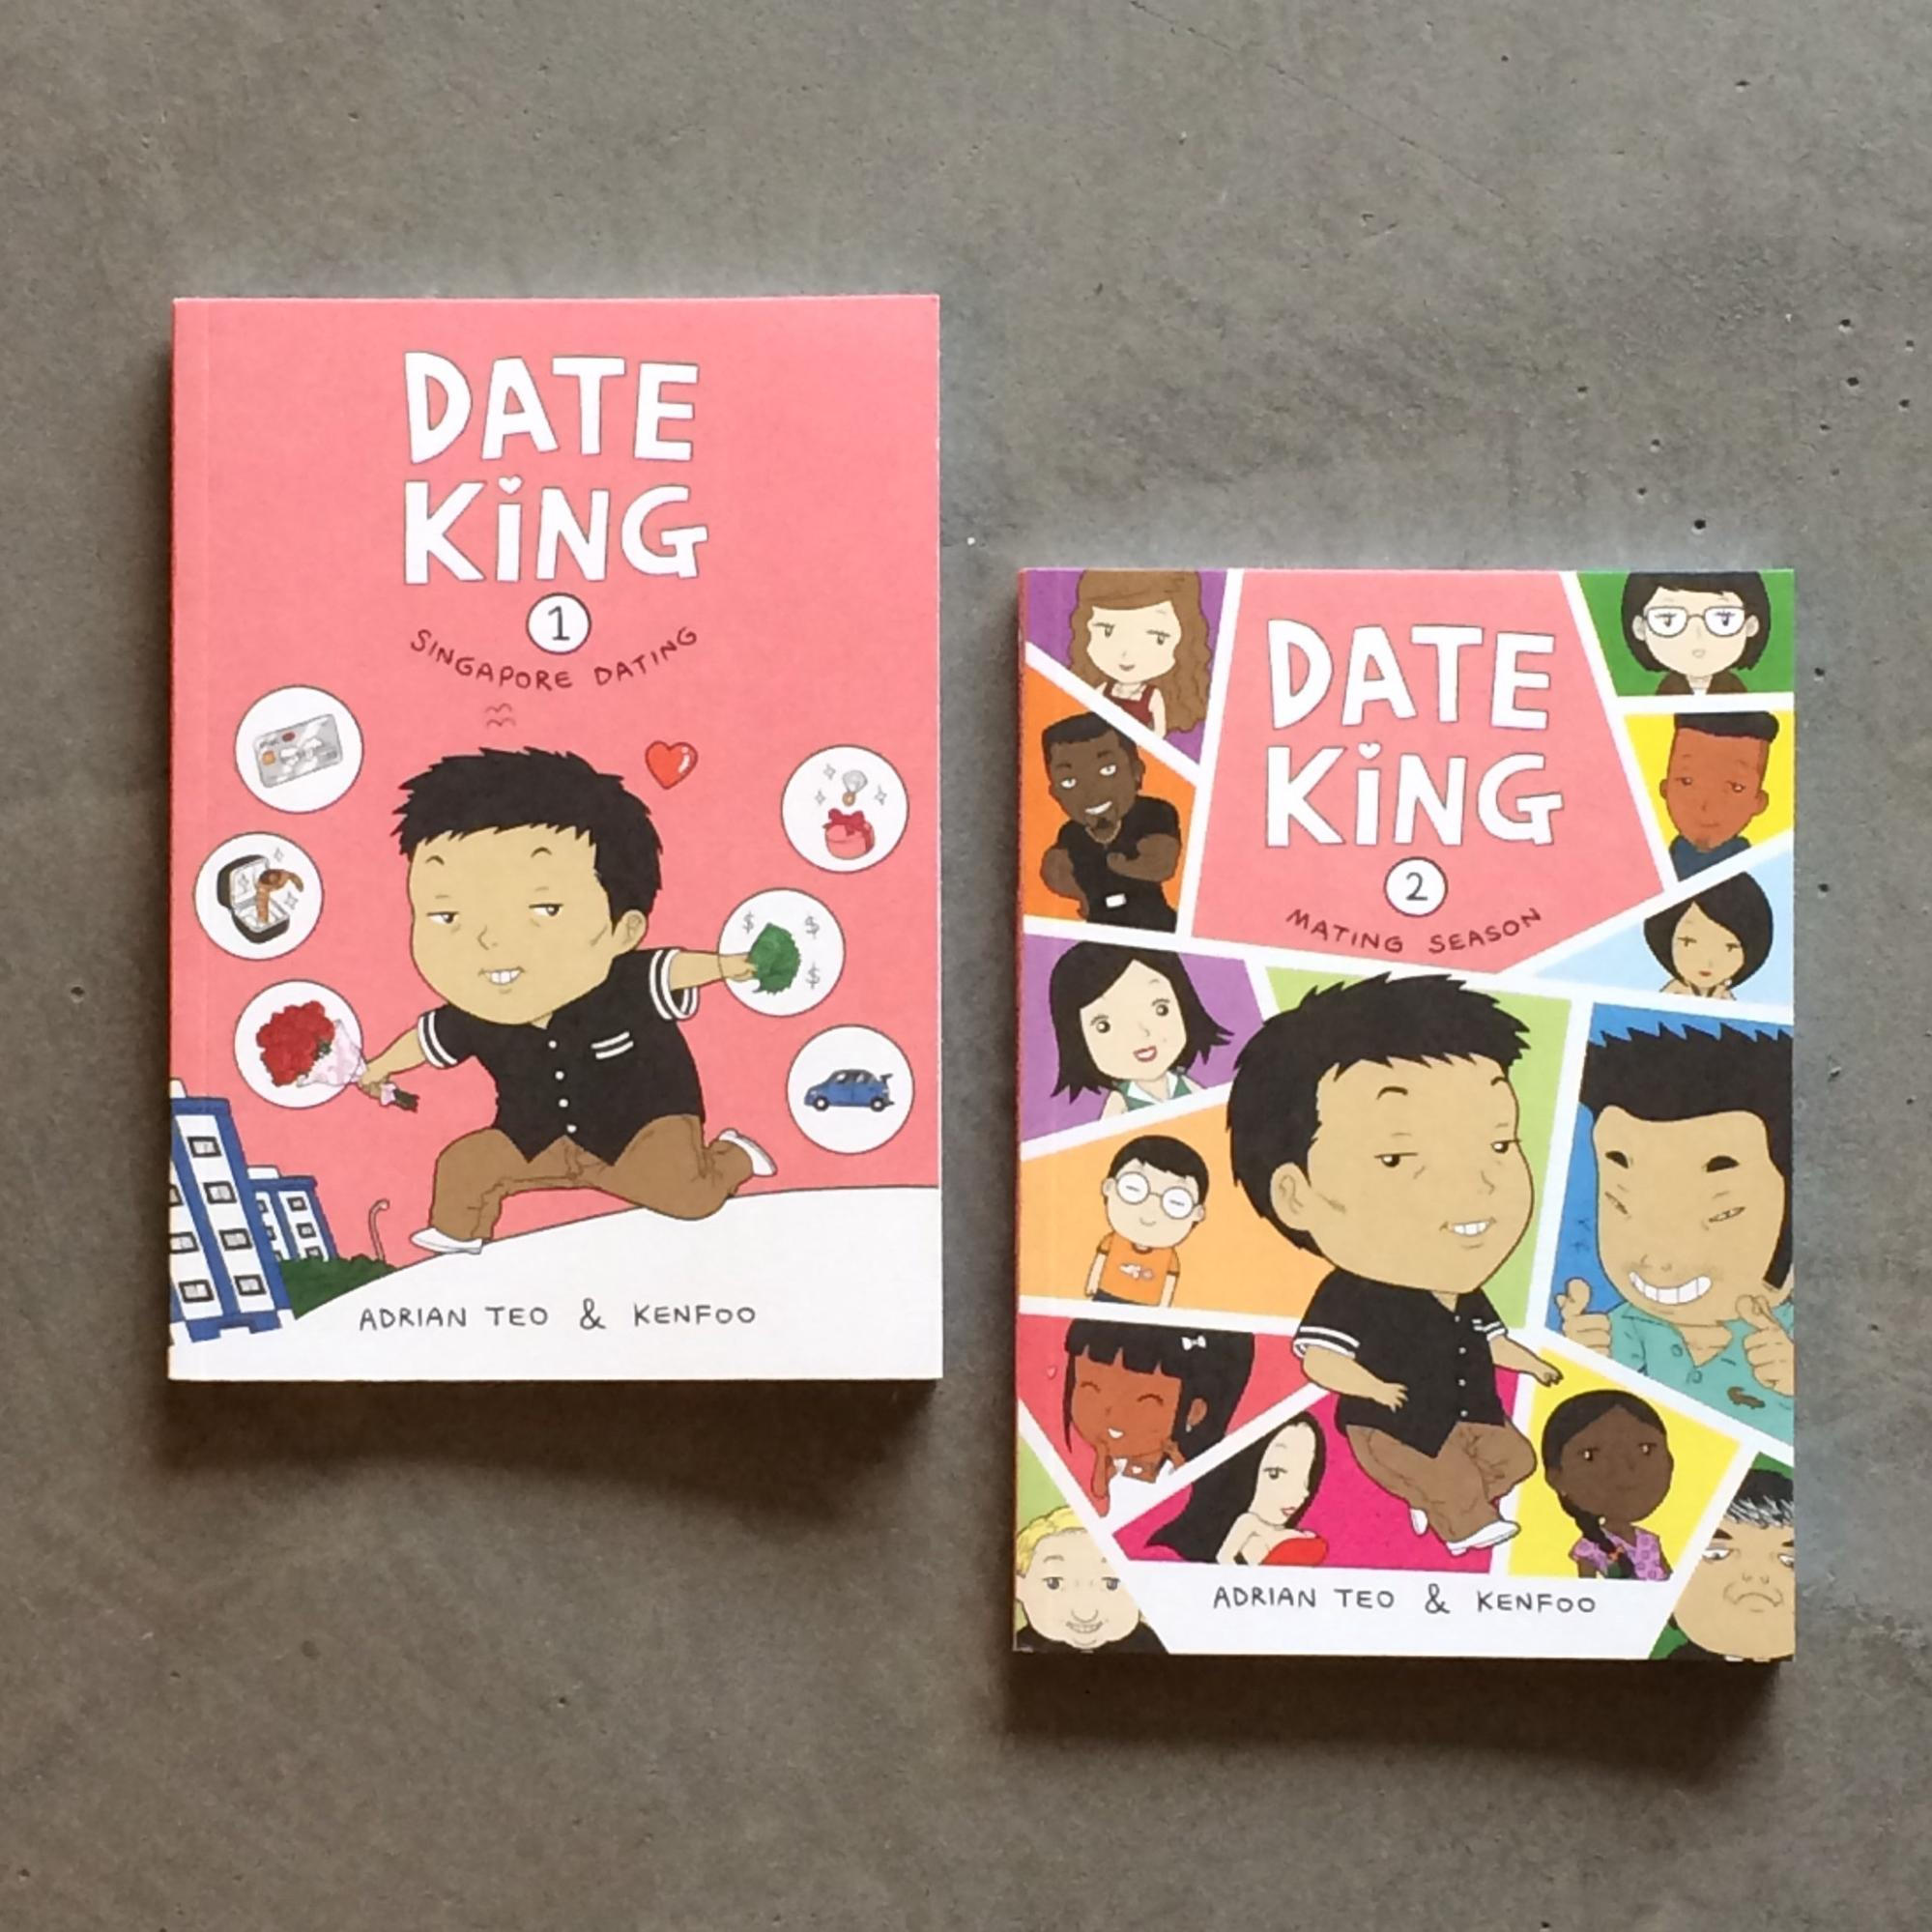 Date King by Adrian Teo and Kenfoo